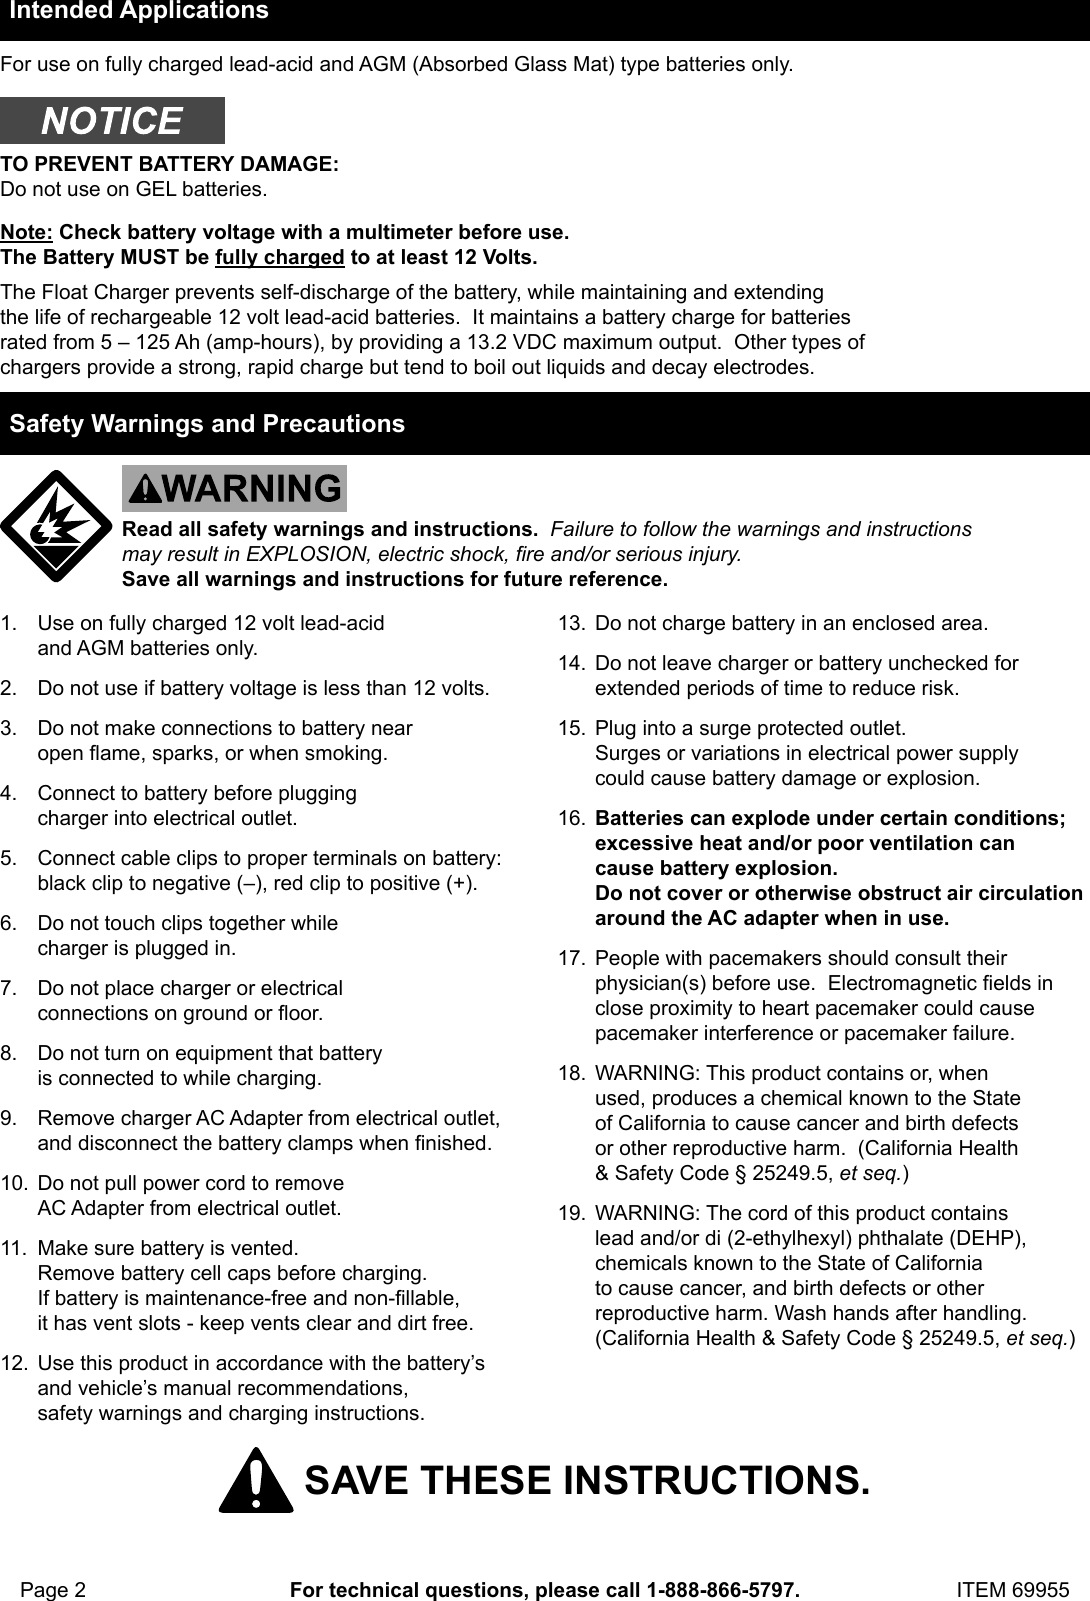 Page 2 of 4 - Manual For The 69955 Battery Float Charger, Automatic